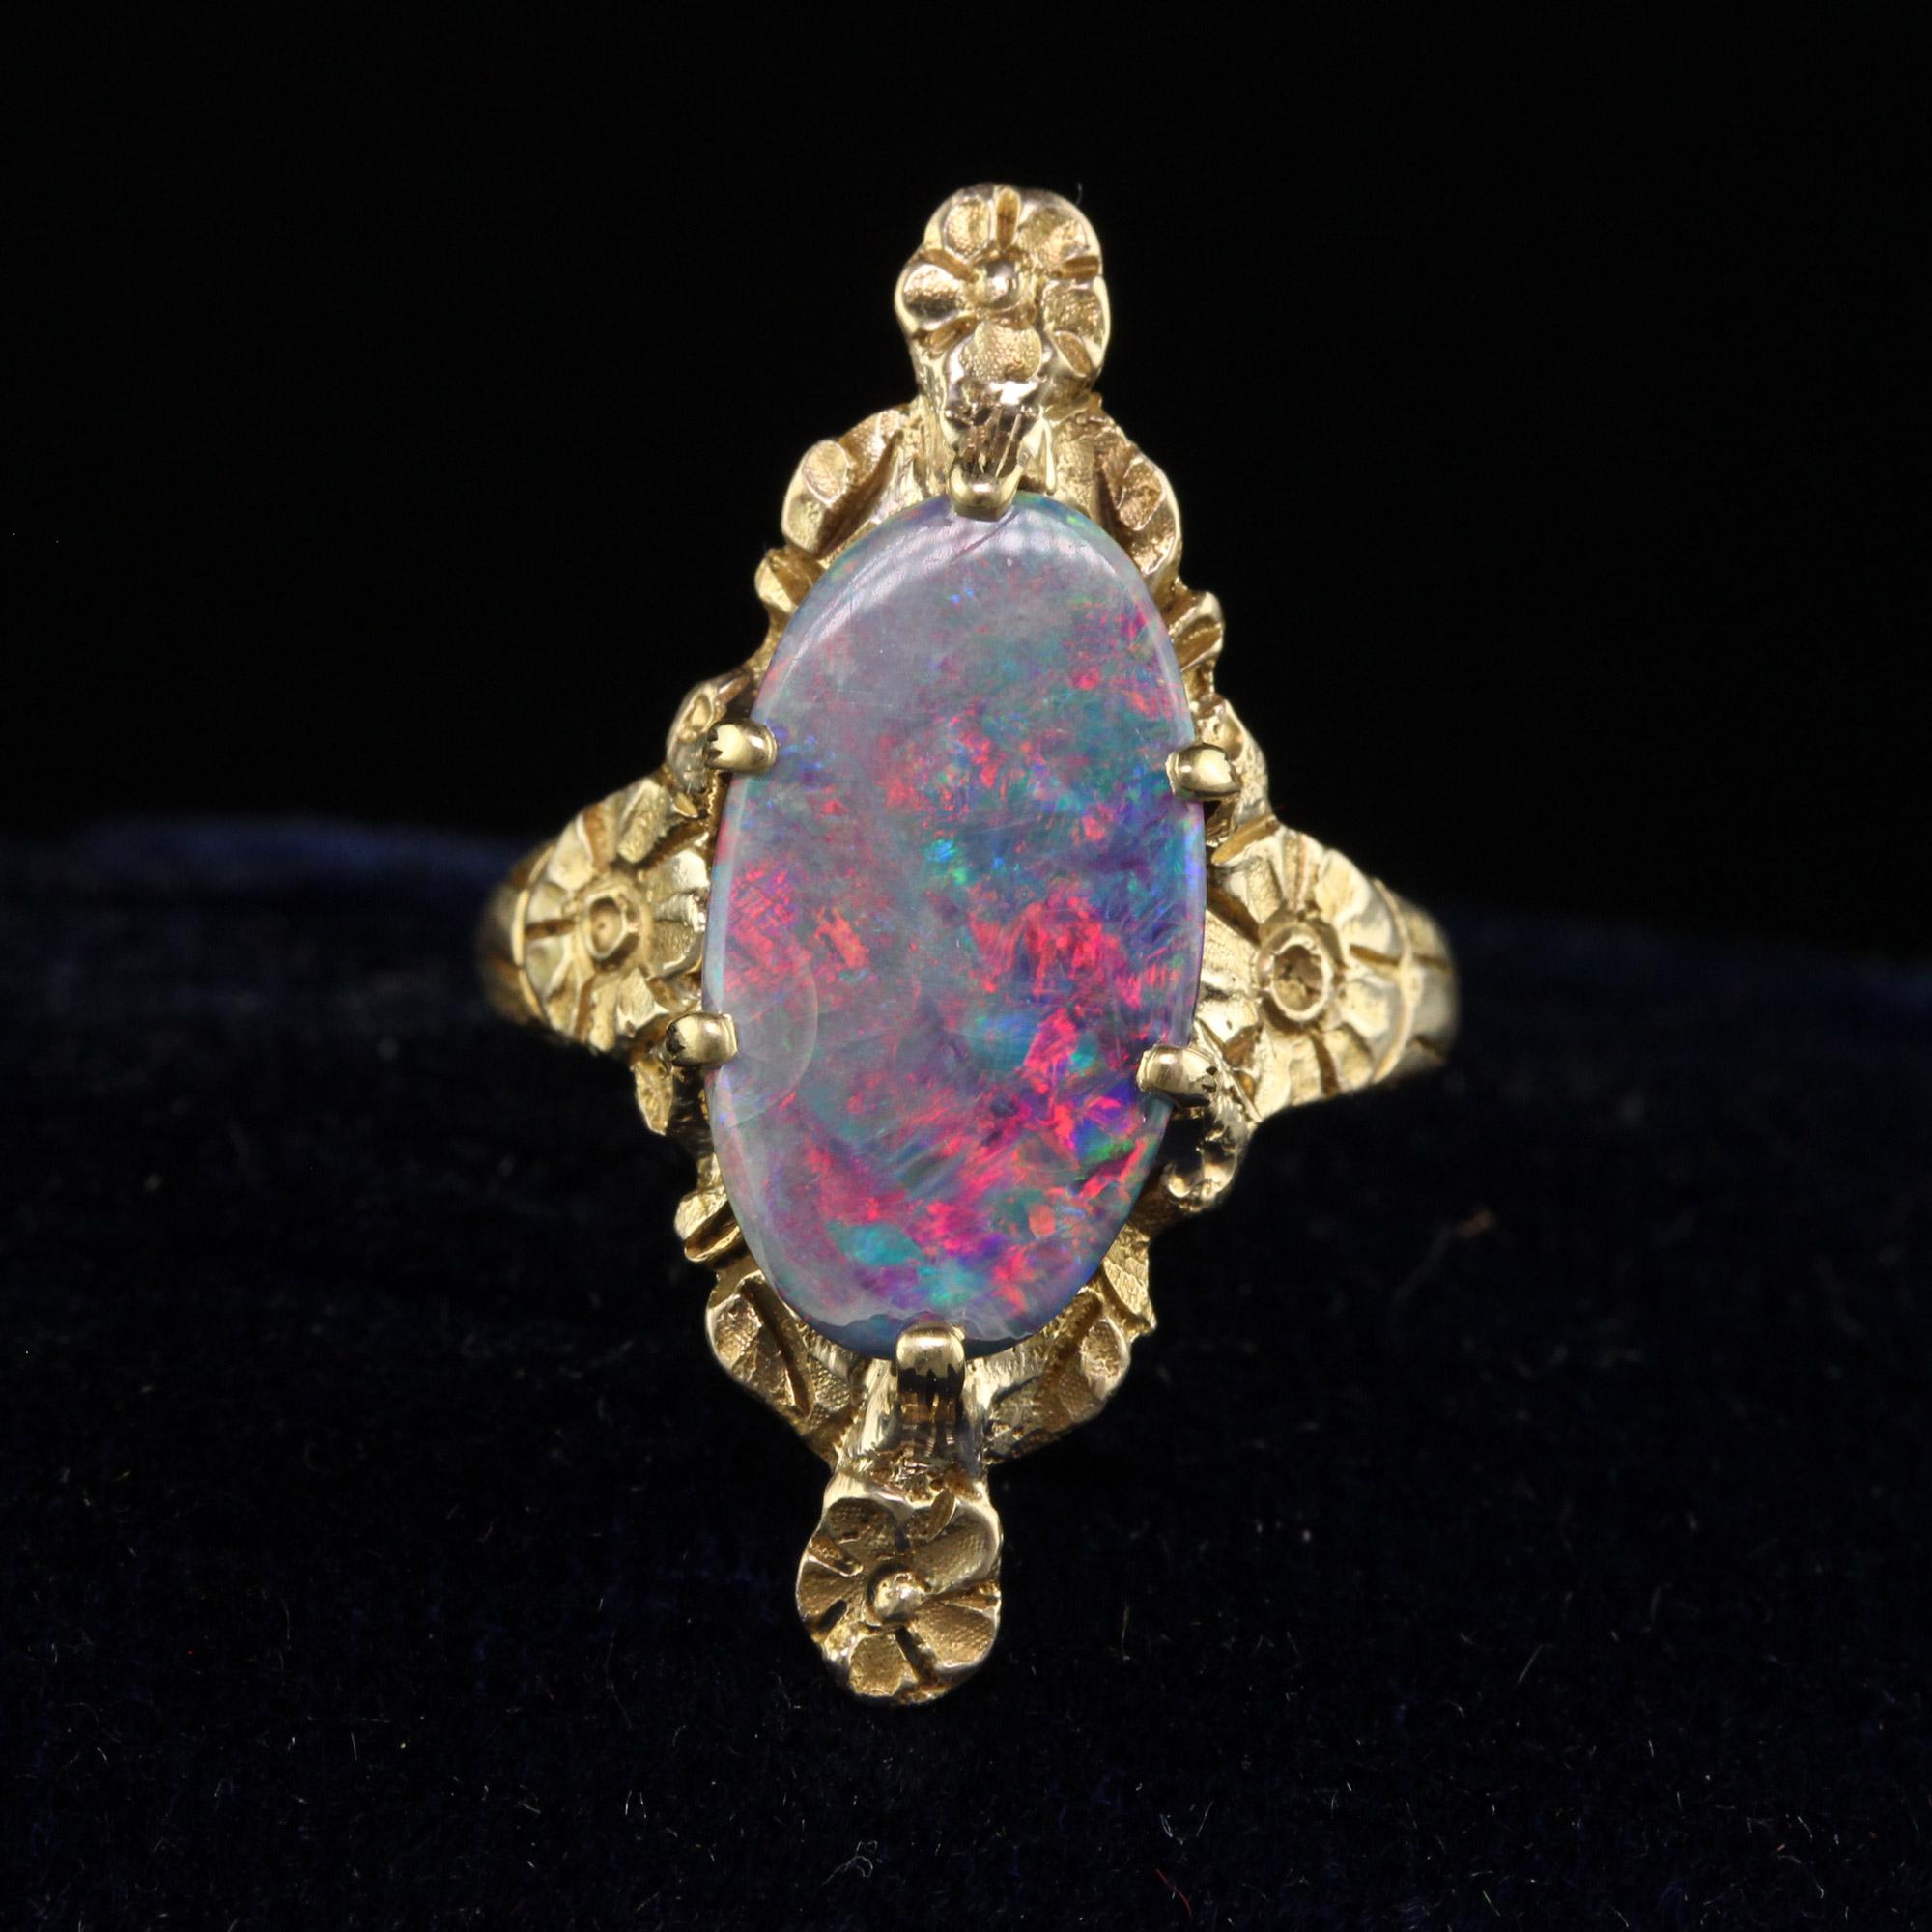 Beautiful Antique Victorian Peacock 10K Yellow Gold Boulder Opal Floral Ring. This beautiful Victorian ring is crafted in 10k yellow gold. The center holds a gorgeous opal that has flashes of red, blue, and green. The ring is in good condition and